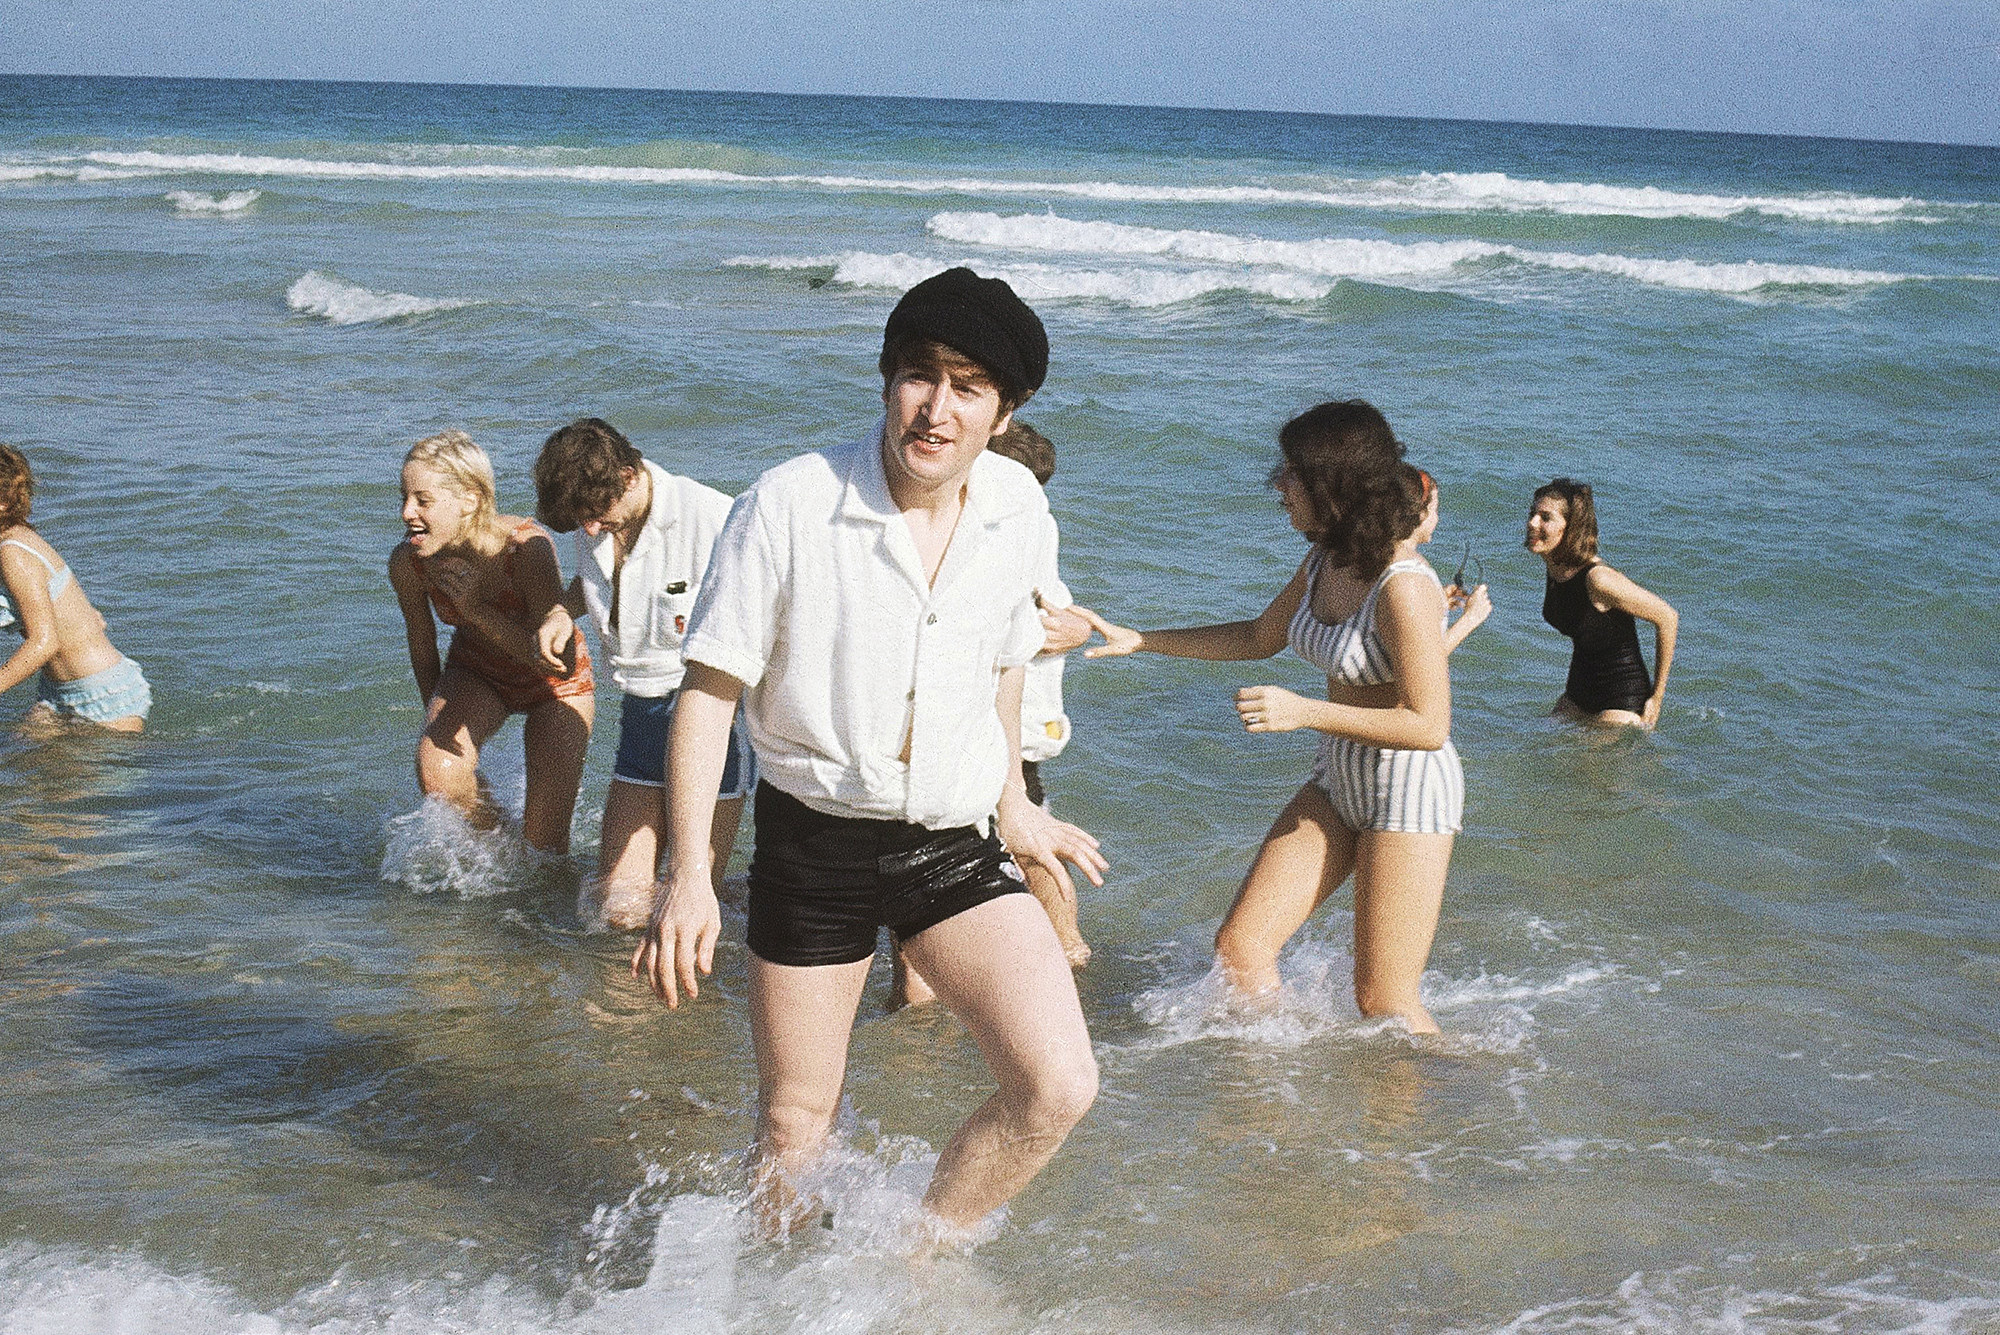 john lennon in shorts and a button down shirt wading in the ocean with a crowd